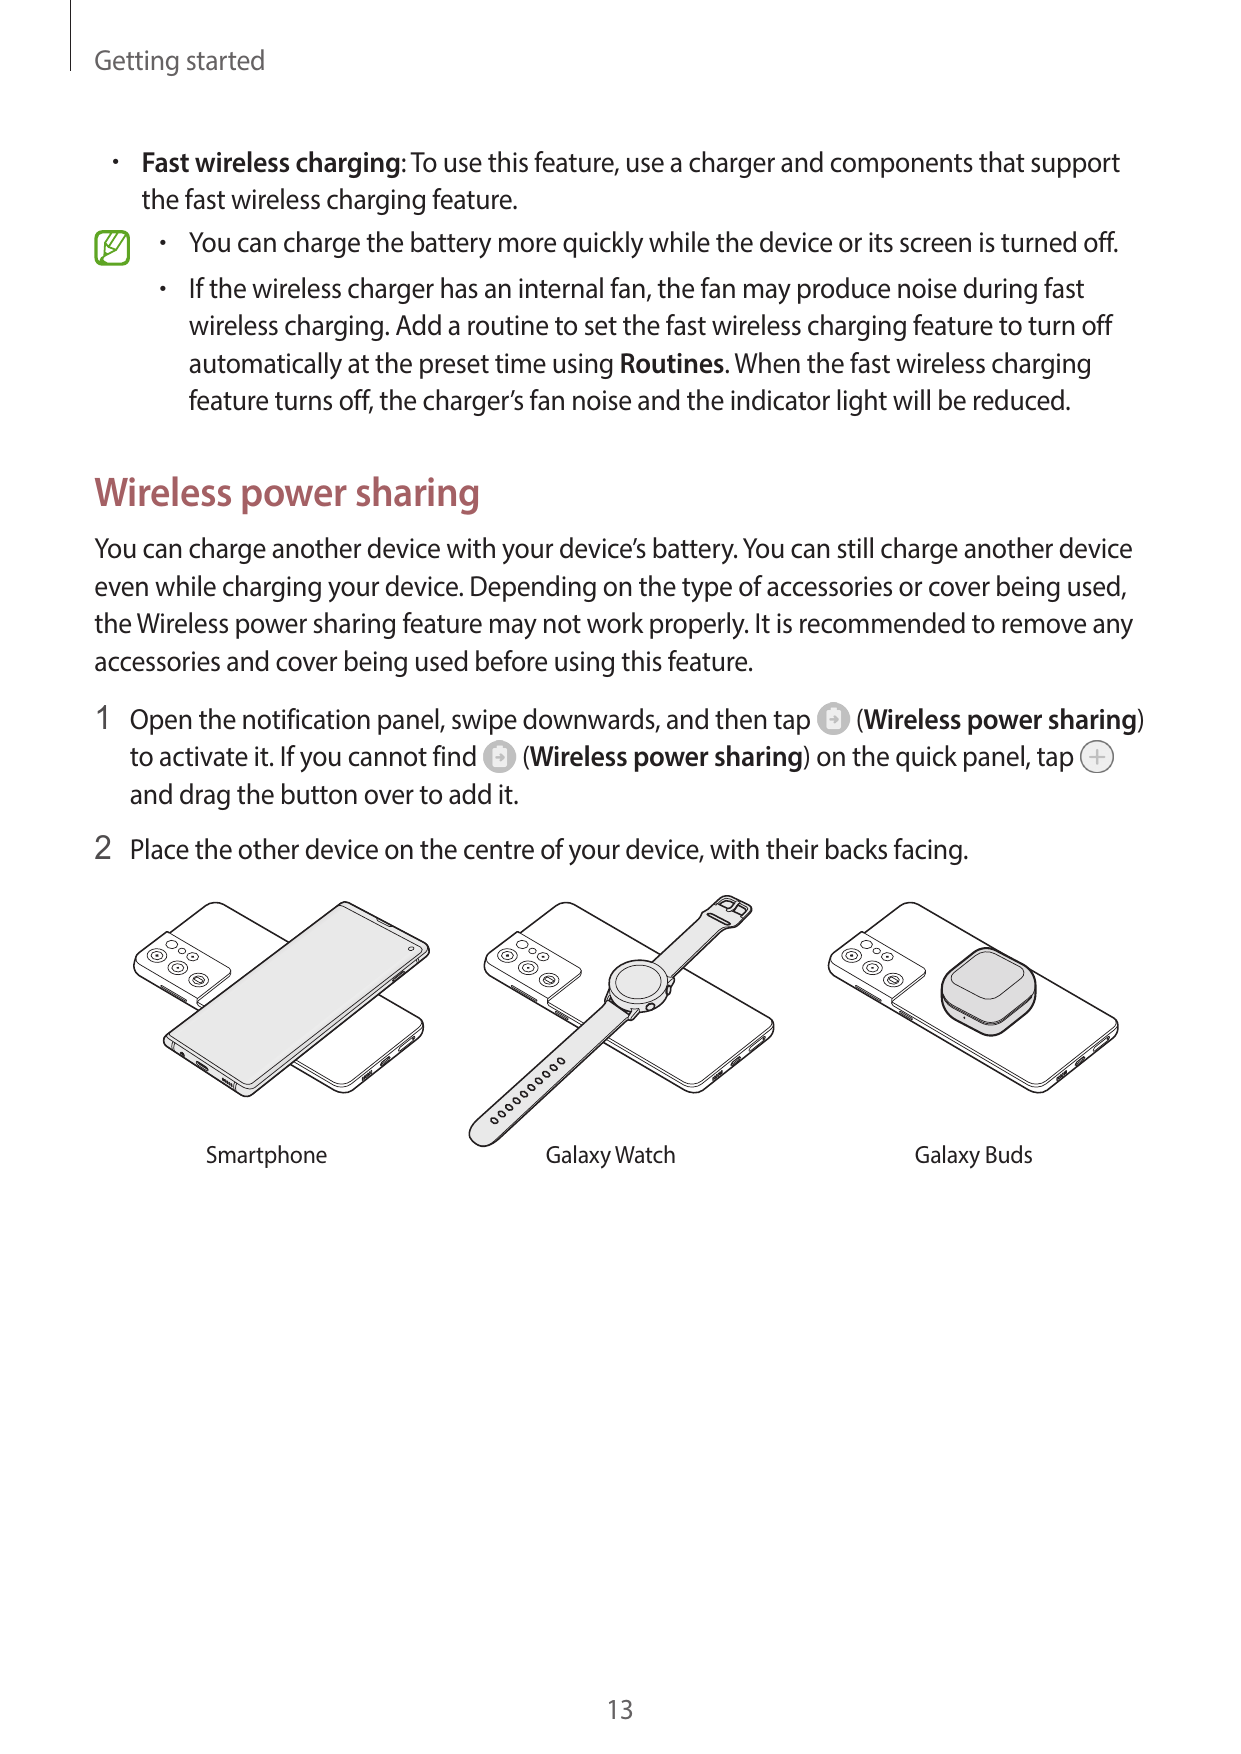 Getting started• Fast wireless charging: To use this feature, use a charger and components that supportthe fast wireless chargin